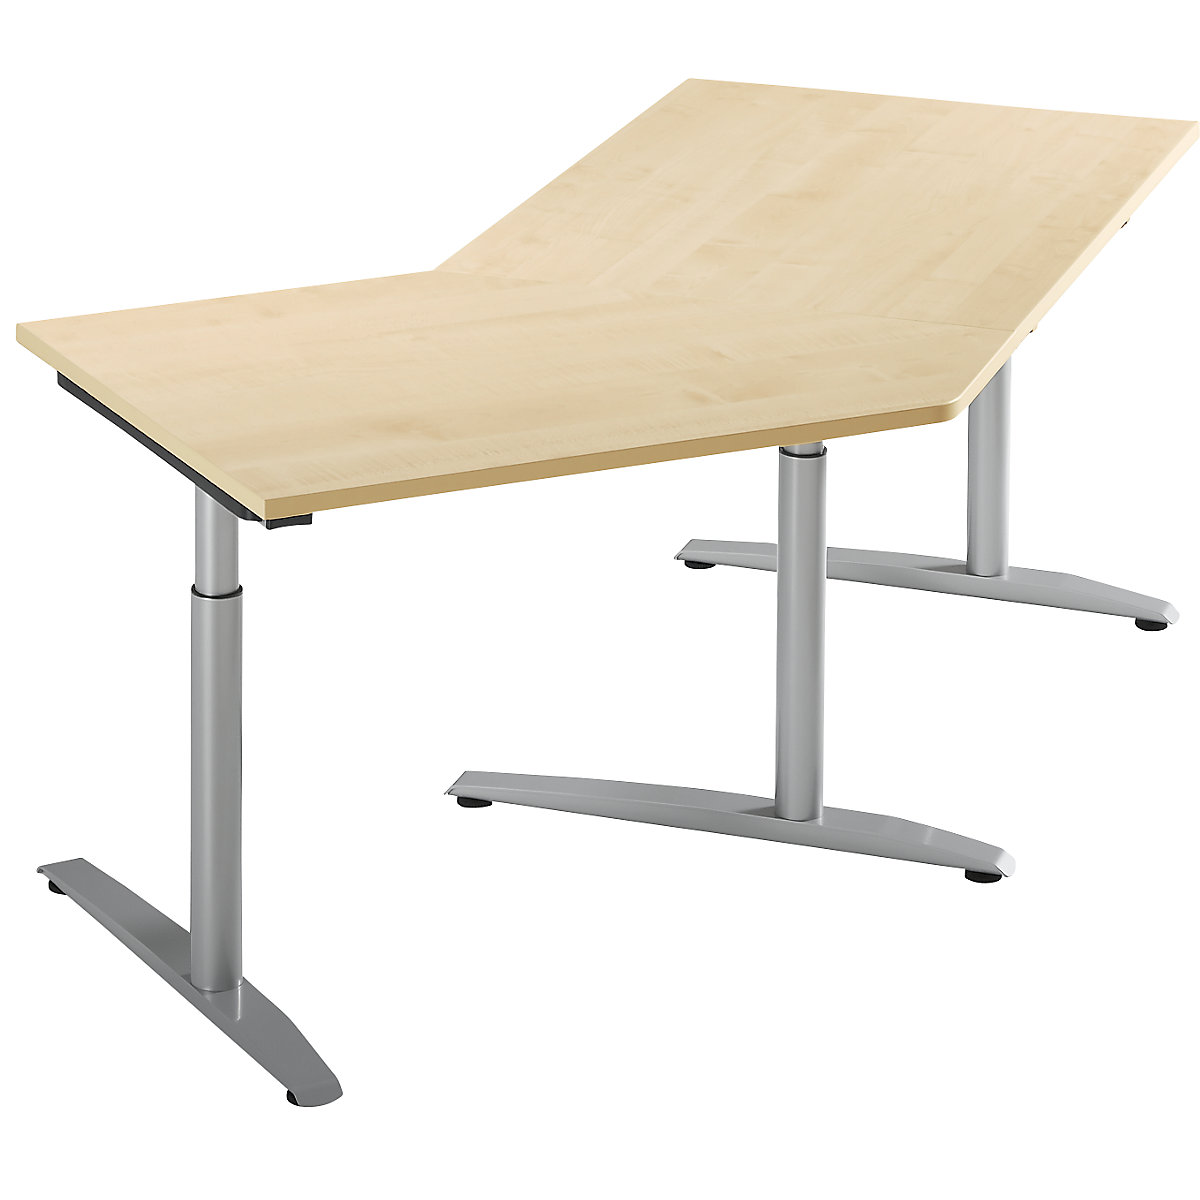 Add-on table, height adjustable from 650 – 850 mm HANNA, 45°, for left side extension, maple finish-5